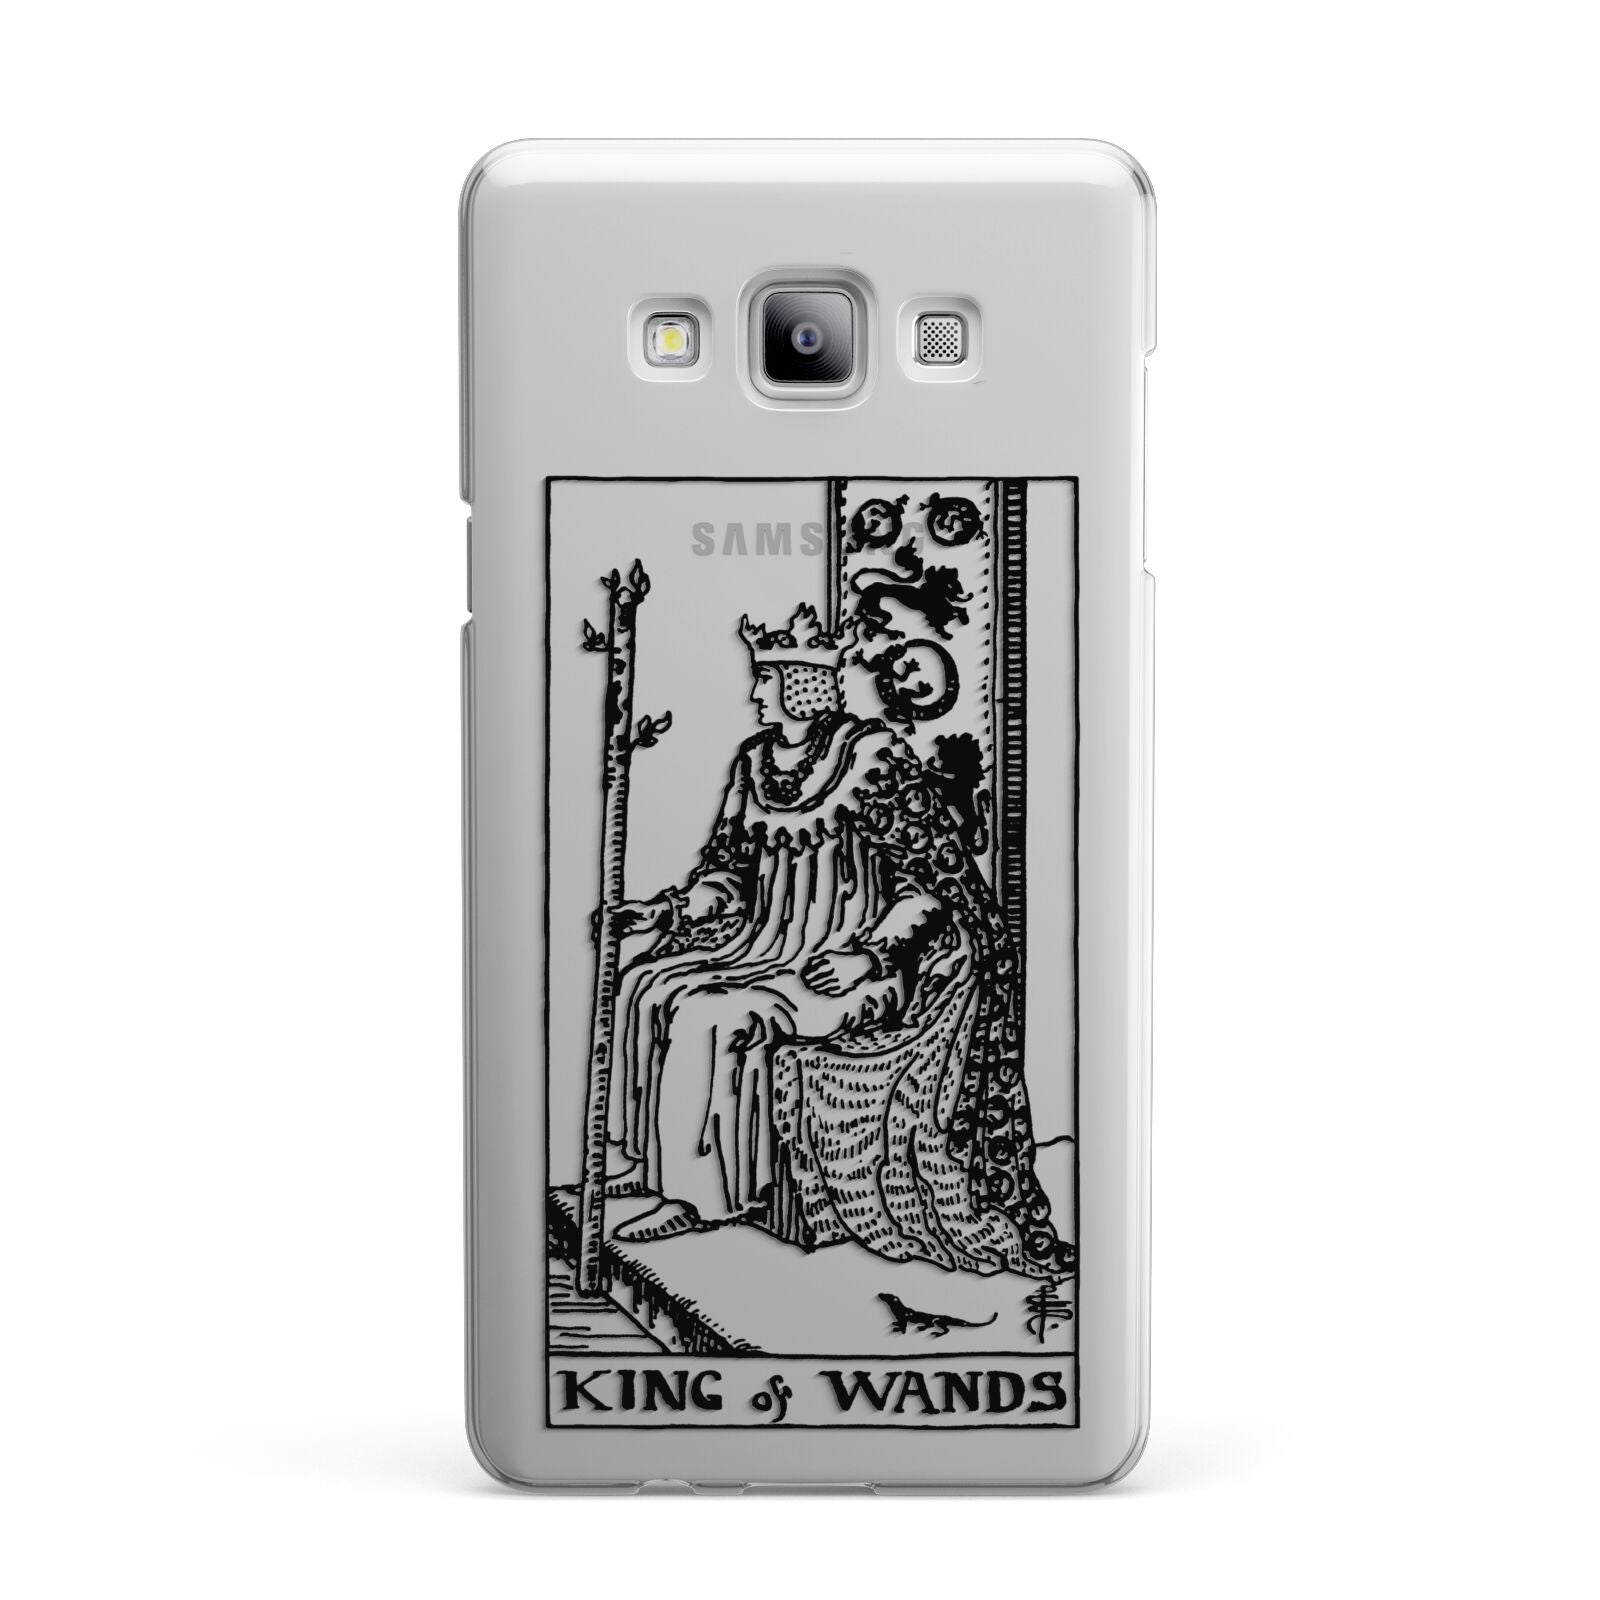 King of Wands Monochrome Samsung Galaxy A7 2015 Case